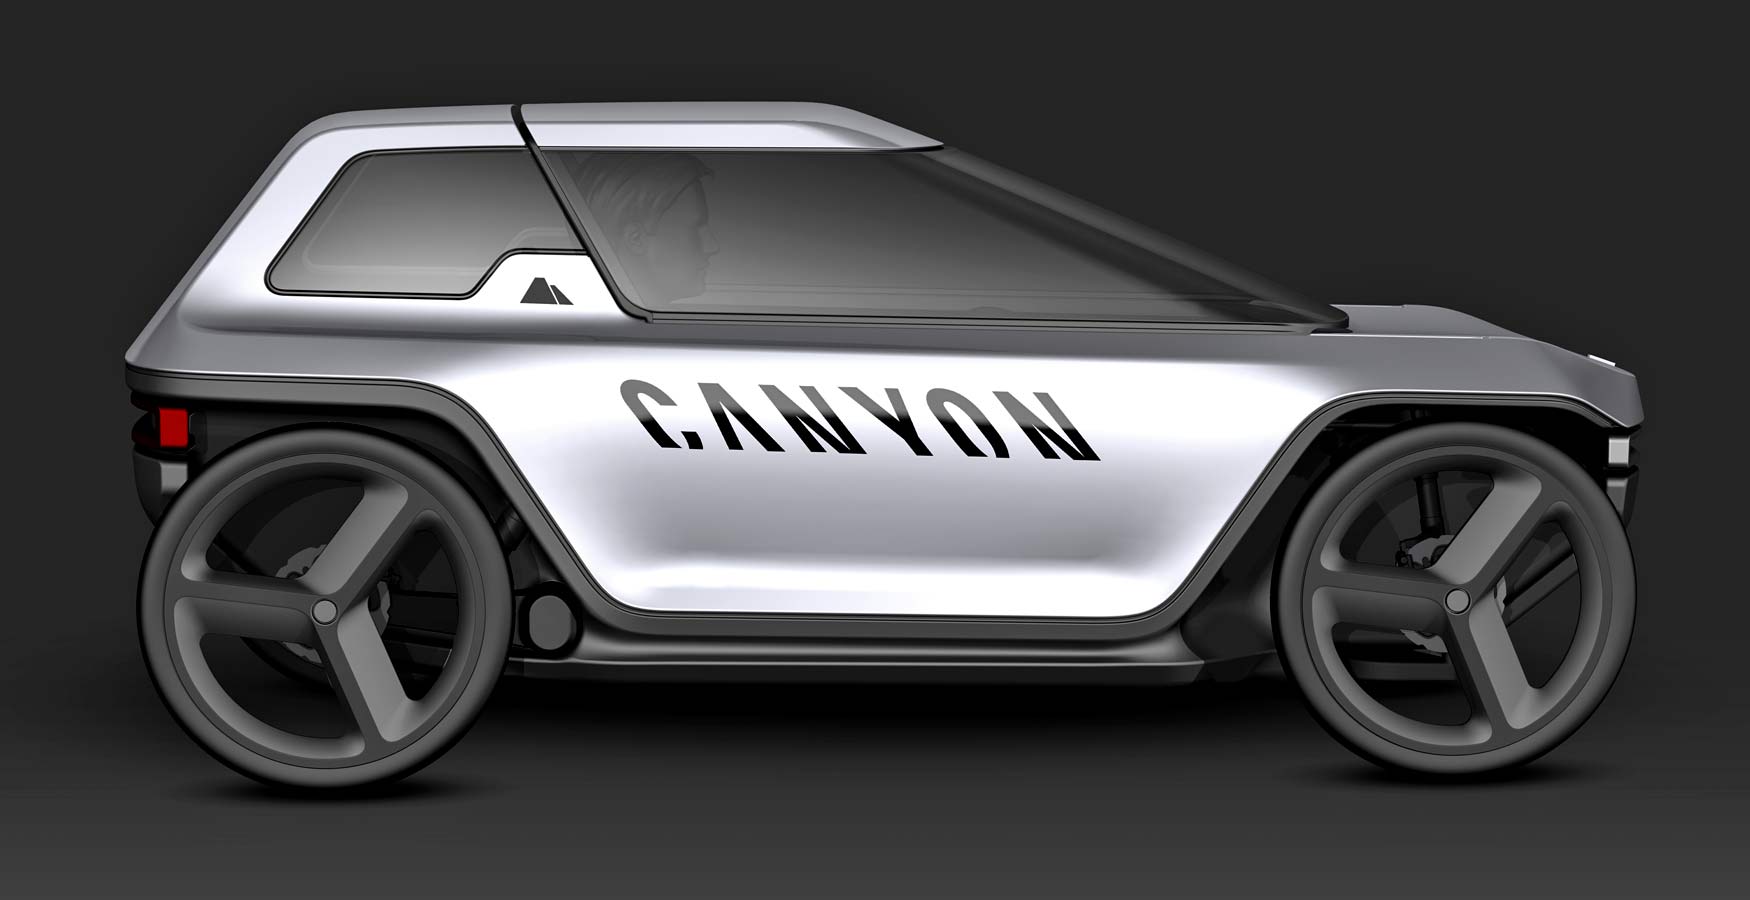 Canyon Future Mobility Concept, electric-assist commuter pedal car, prototype micro car, rendering side